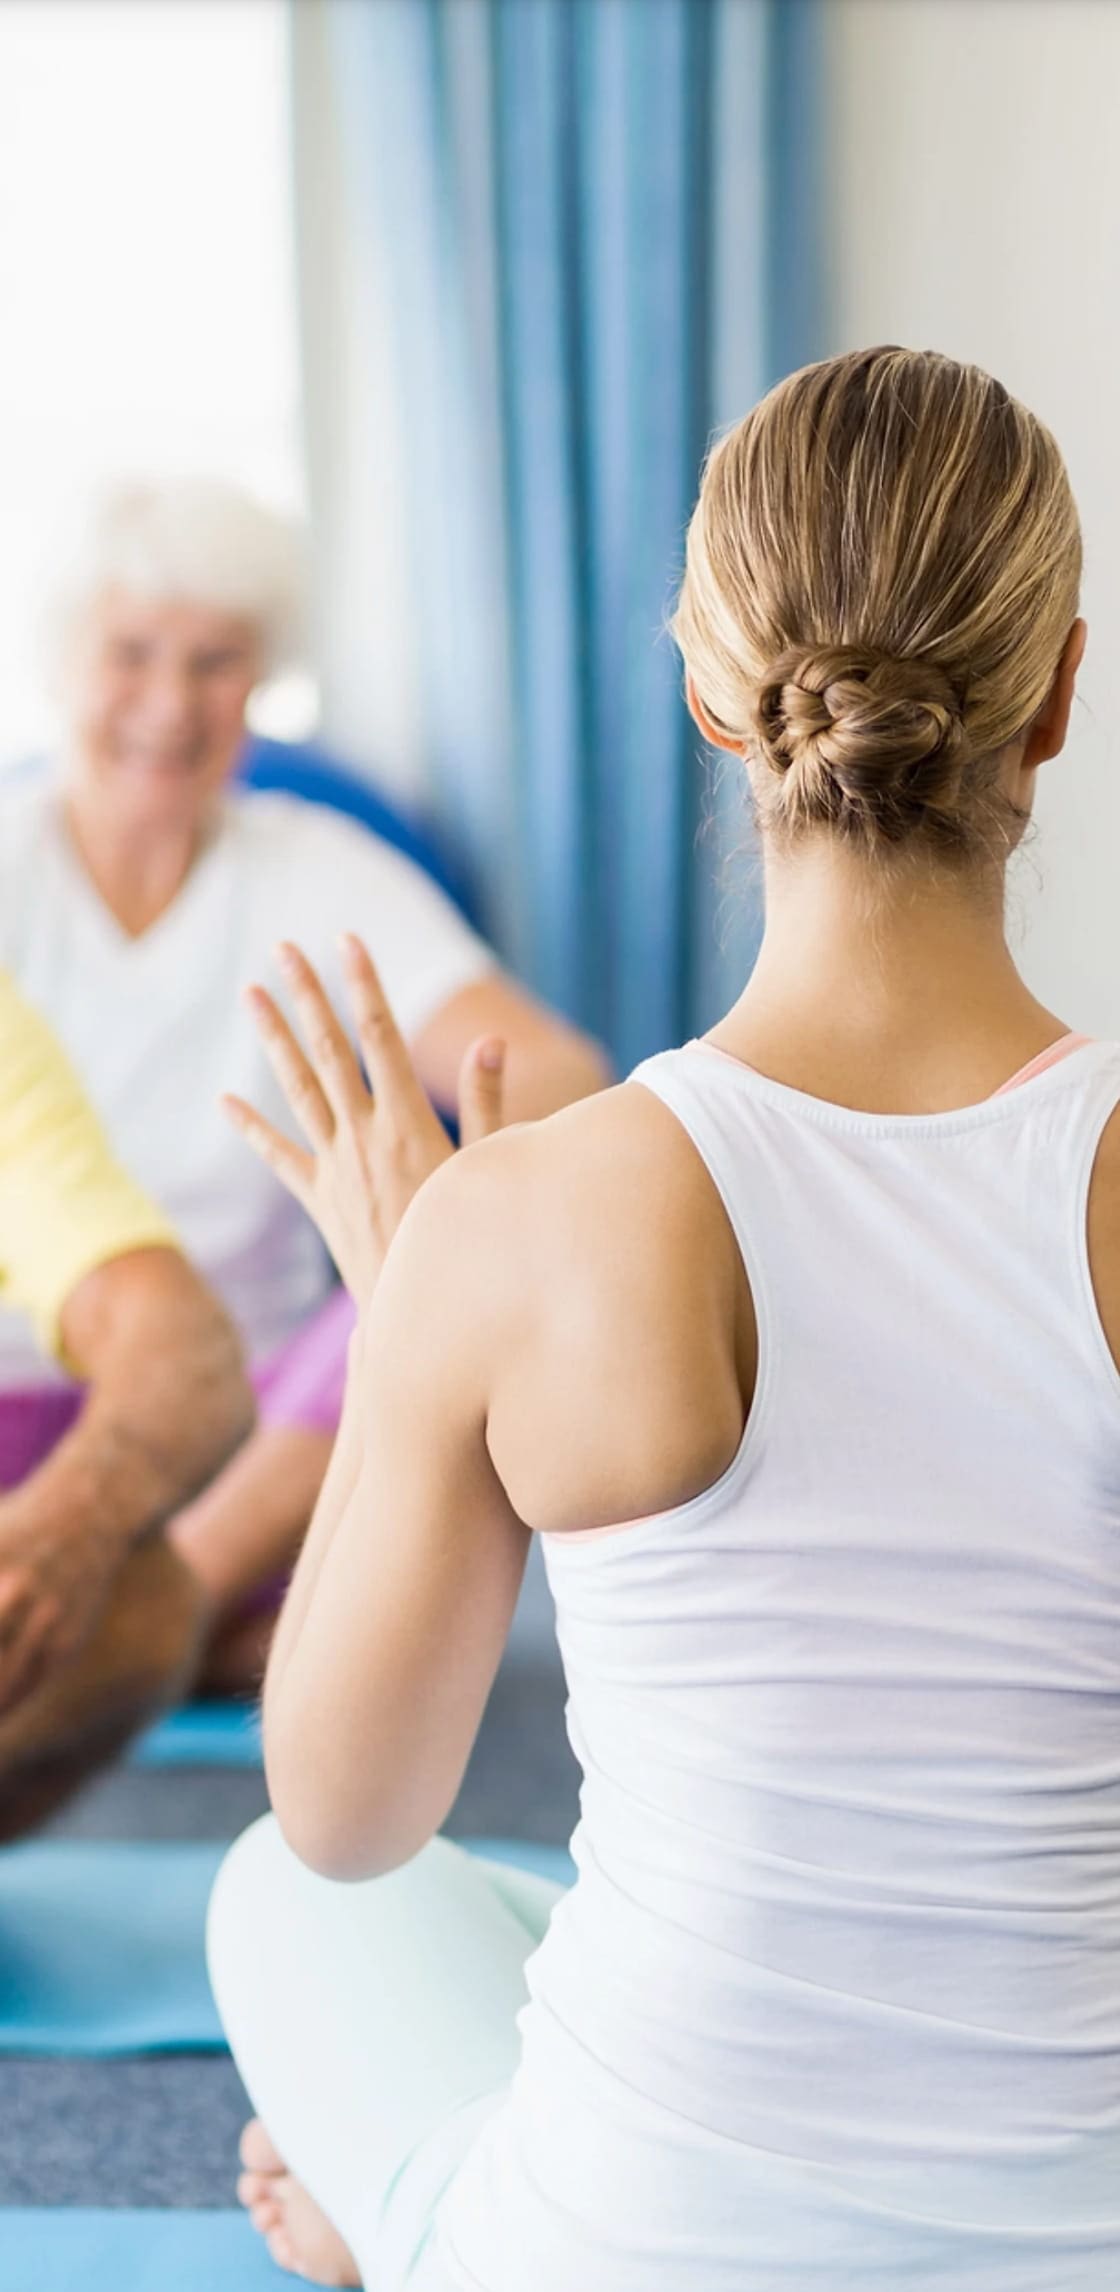 Holly Roser Fitness offers at home and and group fitness classes for seniors of all ages and abilities.